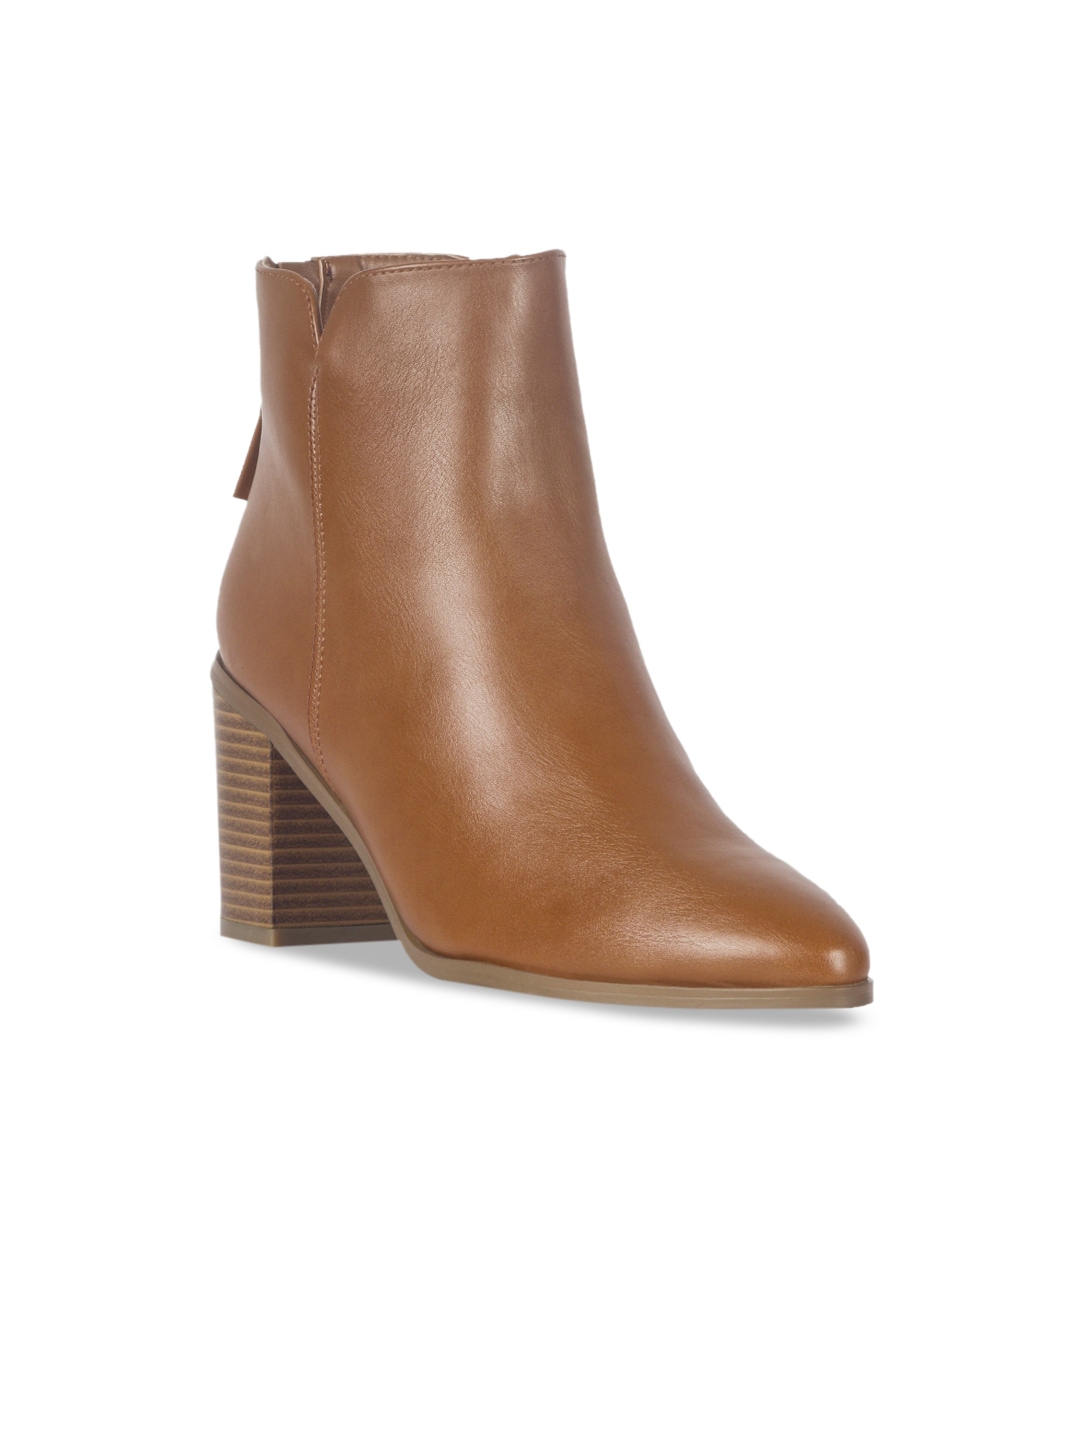 London Rag Tan Block Heeled Boots with Tassels Price in India